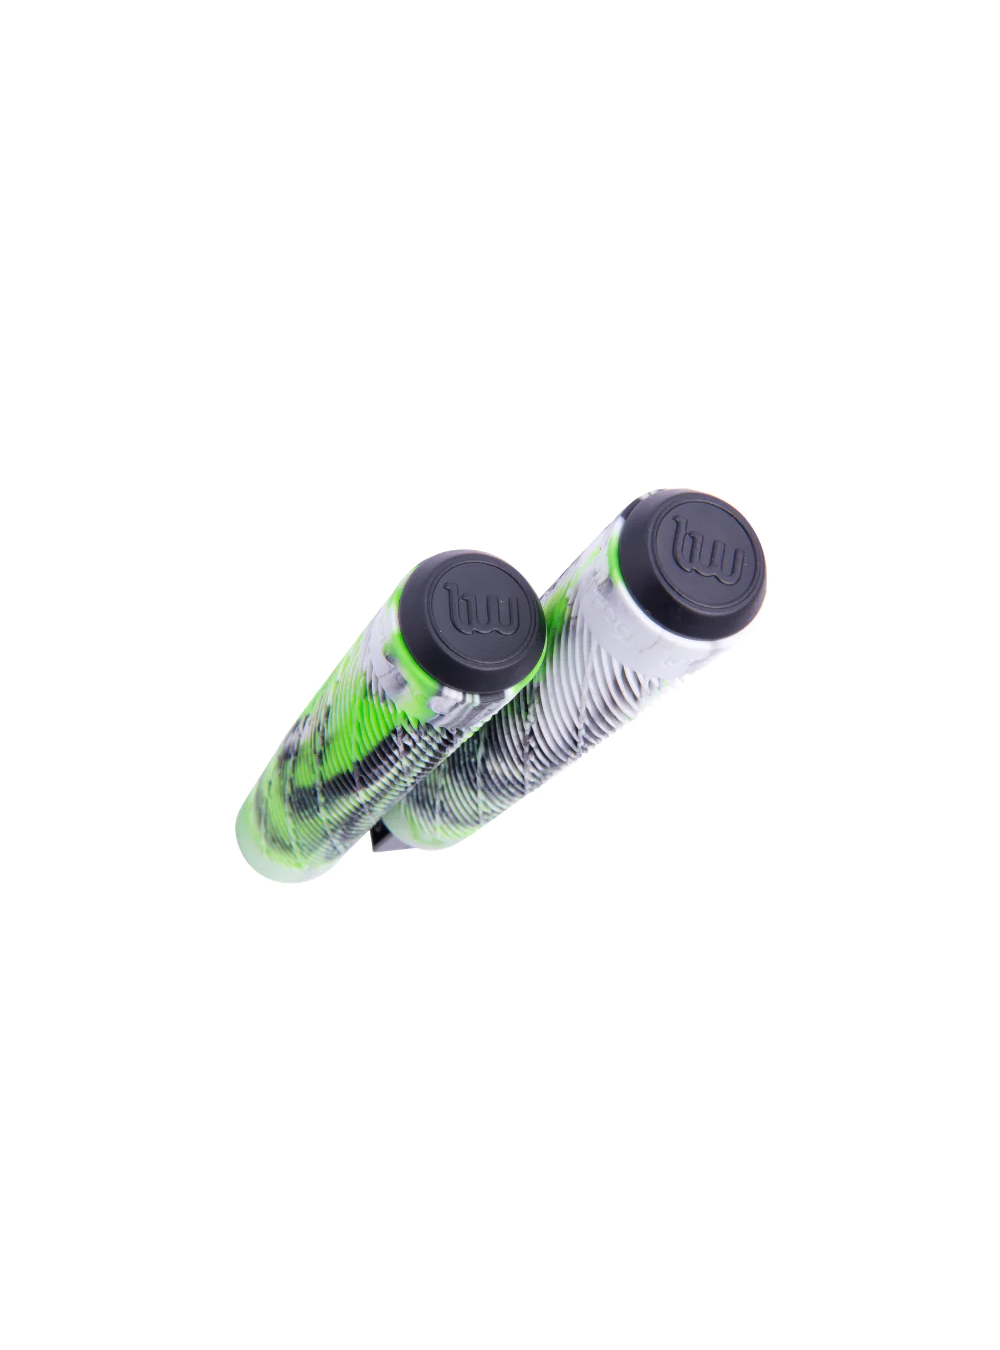 PUÑOS GRIP LONGWAY TWISTER COLORS